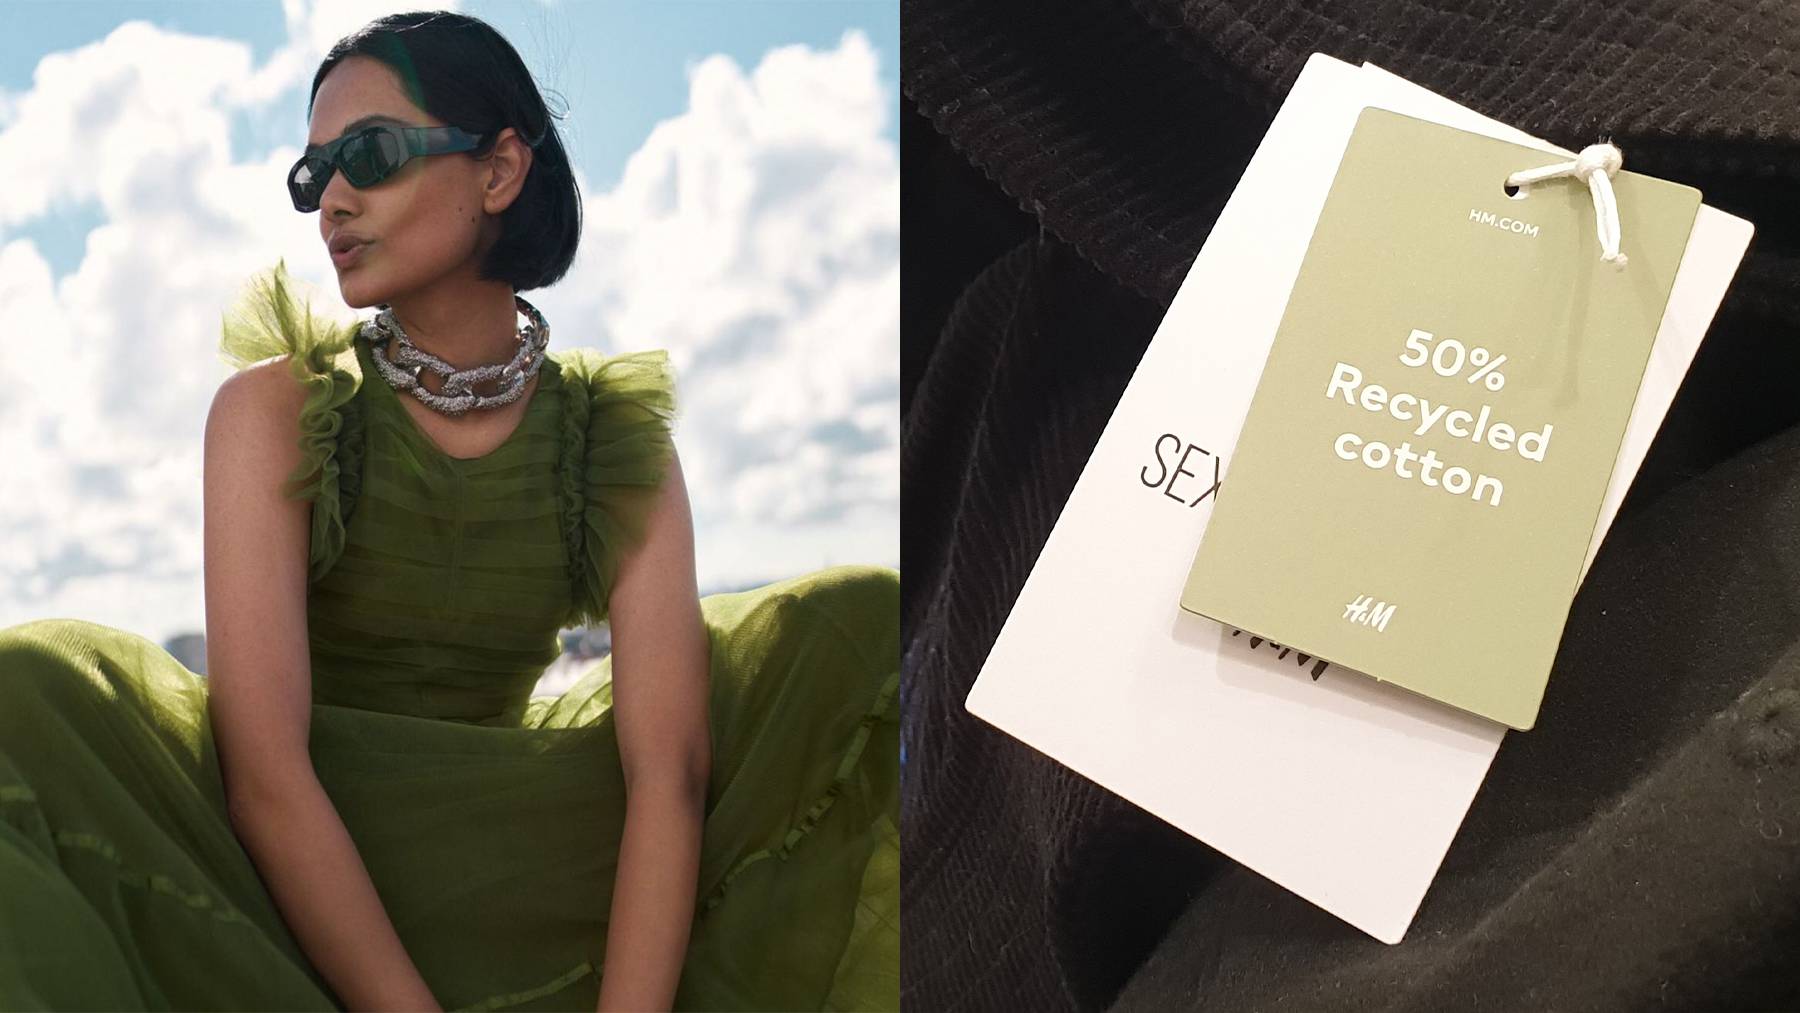 In one image, a woman in a green chiffon dress with ruffled sleeves sits in the sun, with puffy white clouds in the background. A second image shows a clothing label with the words "50% recycled cotton" on it.